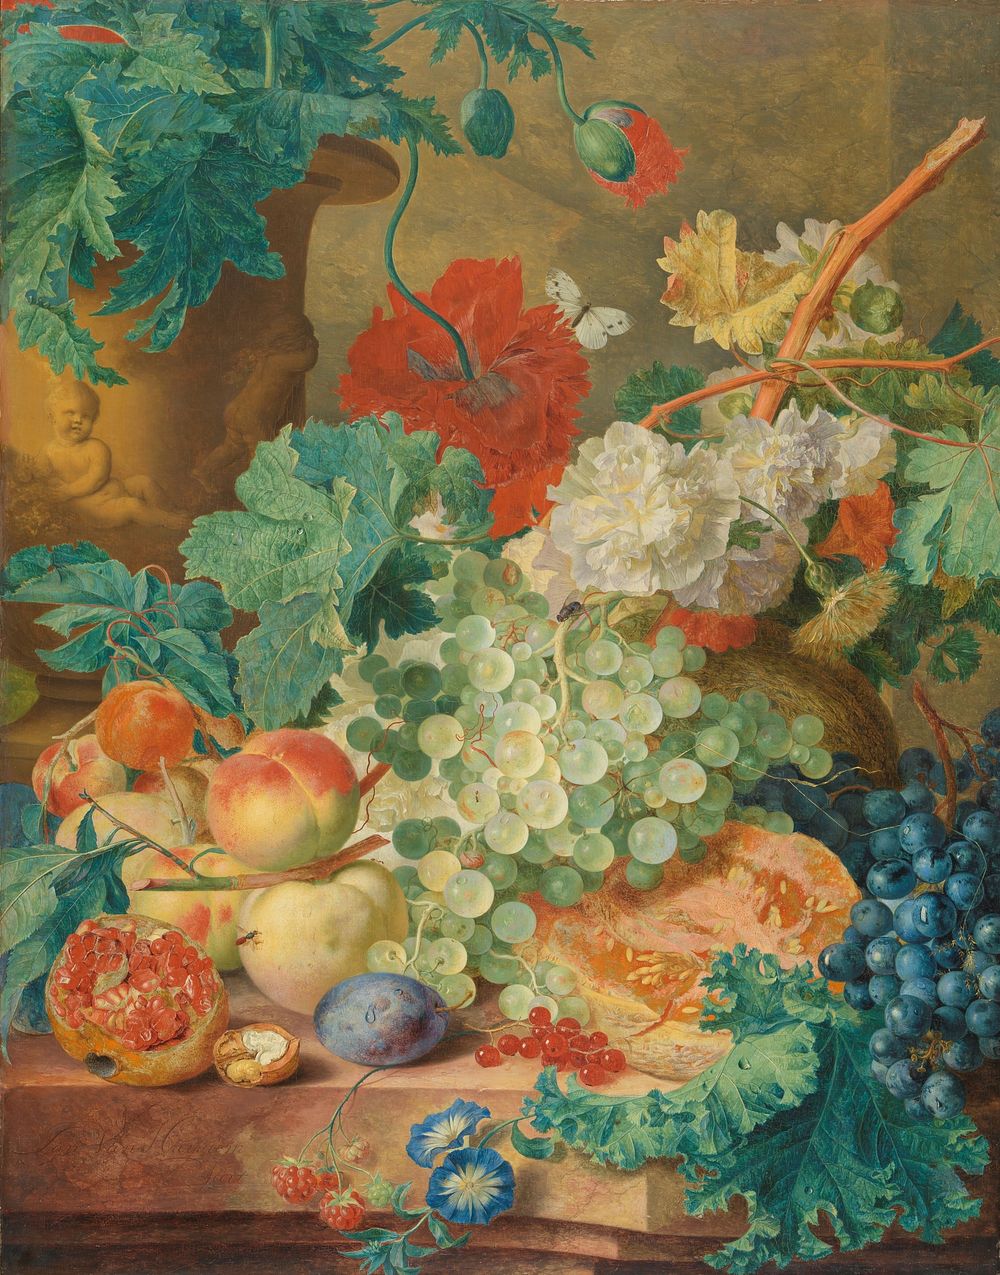 Still Life with Flowers and Fruit (c. 1728) by Jan van Huysum